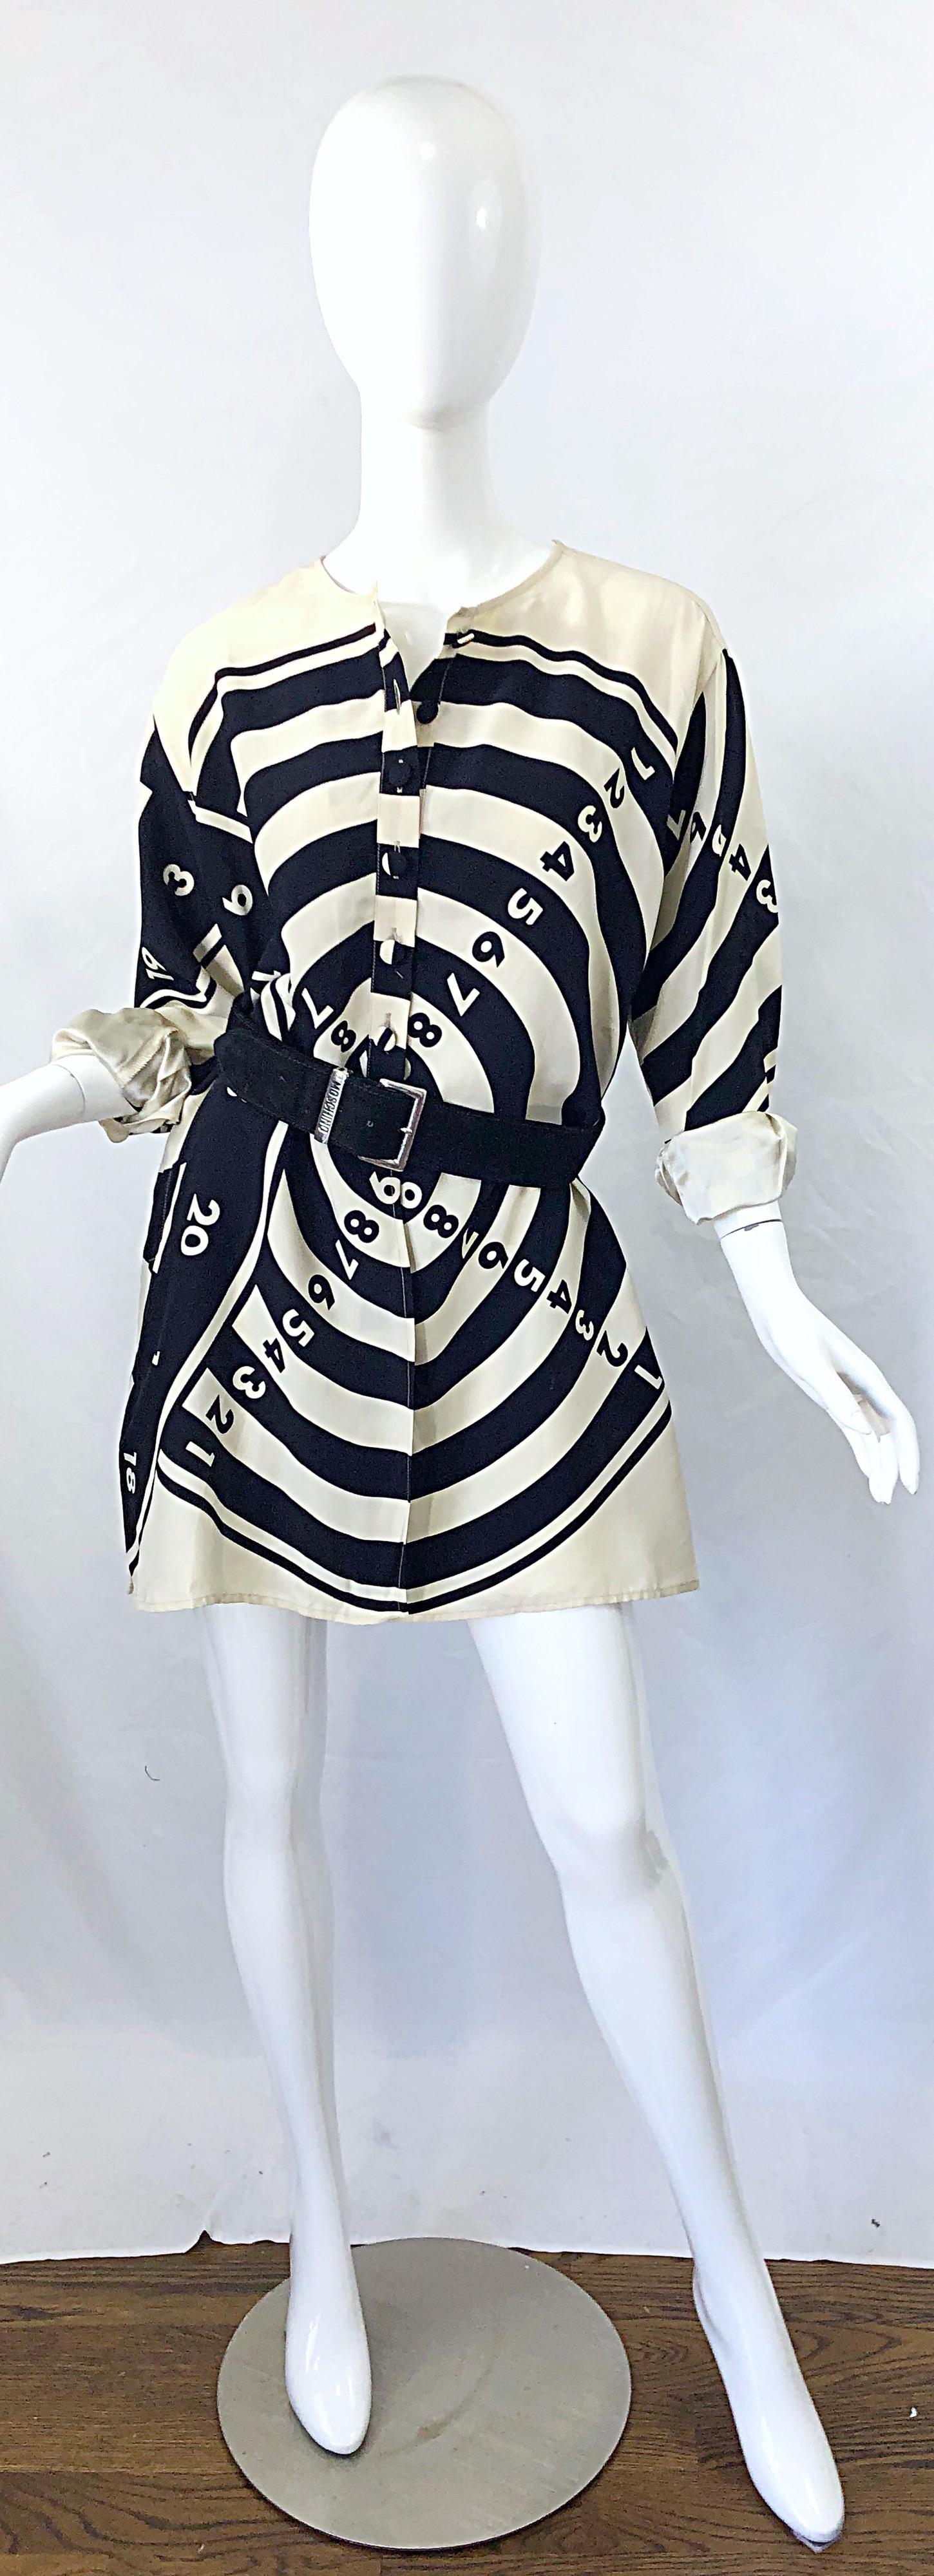 1980s Moschino Cheap & Chic Bullseye Black and White Size 8 Vintage Tunic Dress For Sale 1